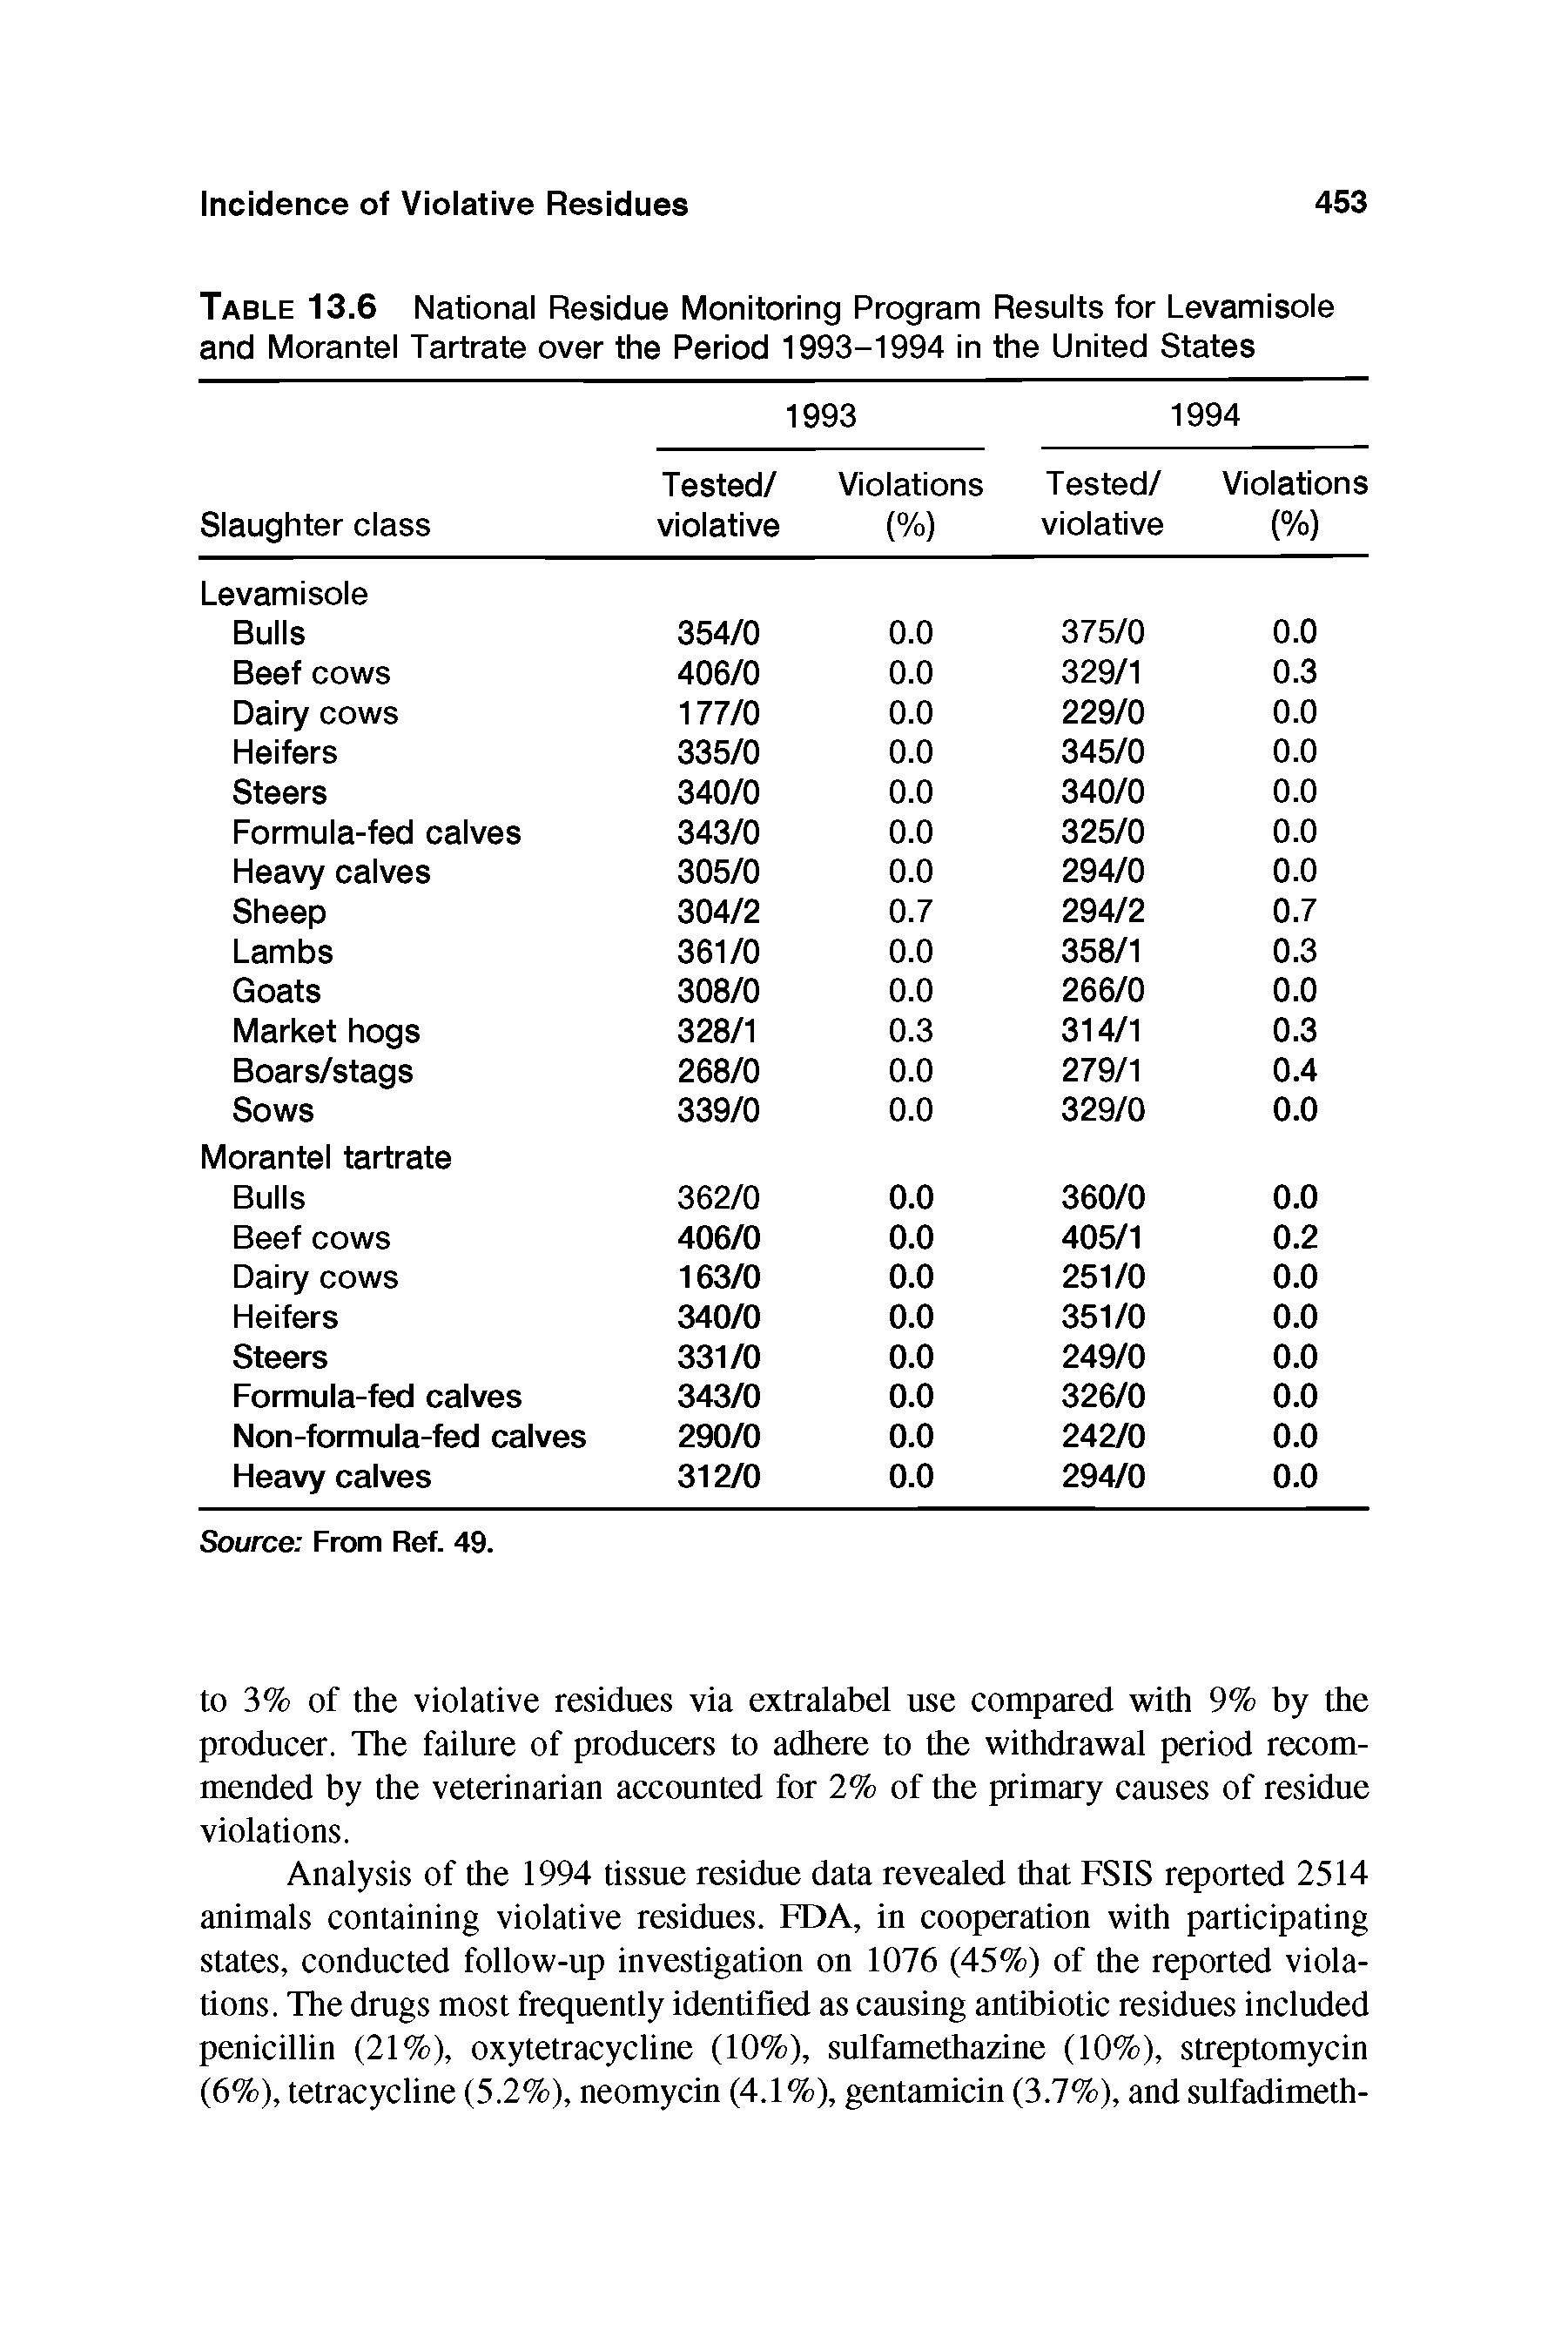 Table 13.6 National Residue Monitoring Program Results for Levamisole and Morantel Tartrate over the Period 1993-1994 in the United States...